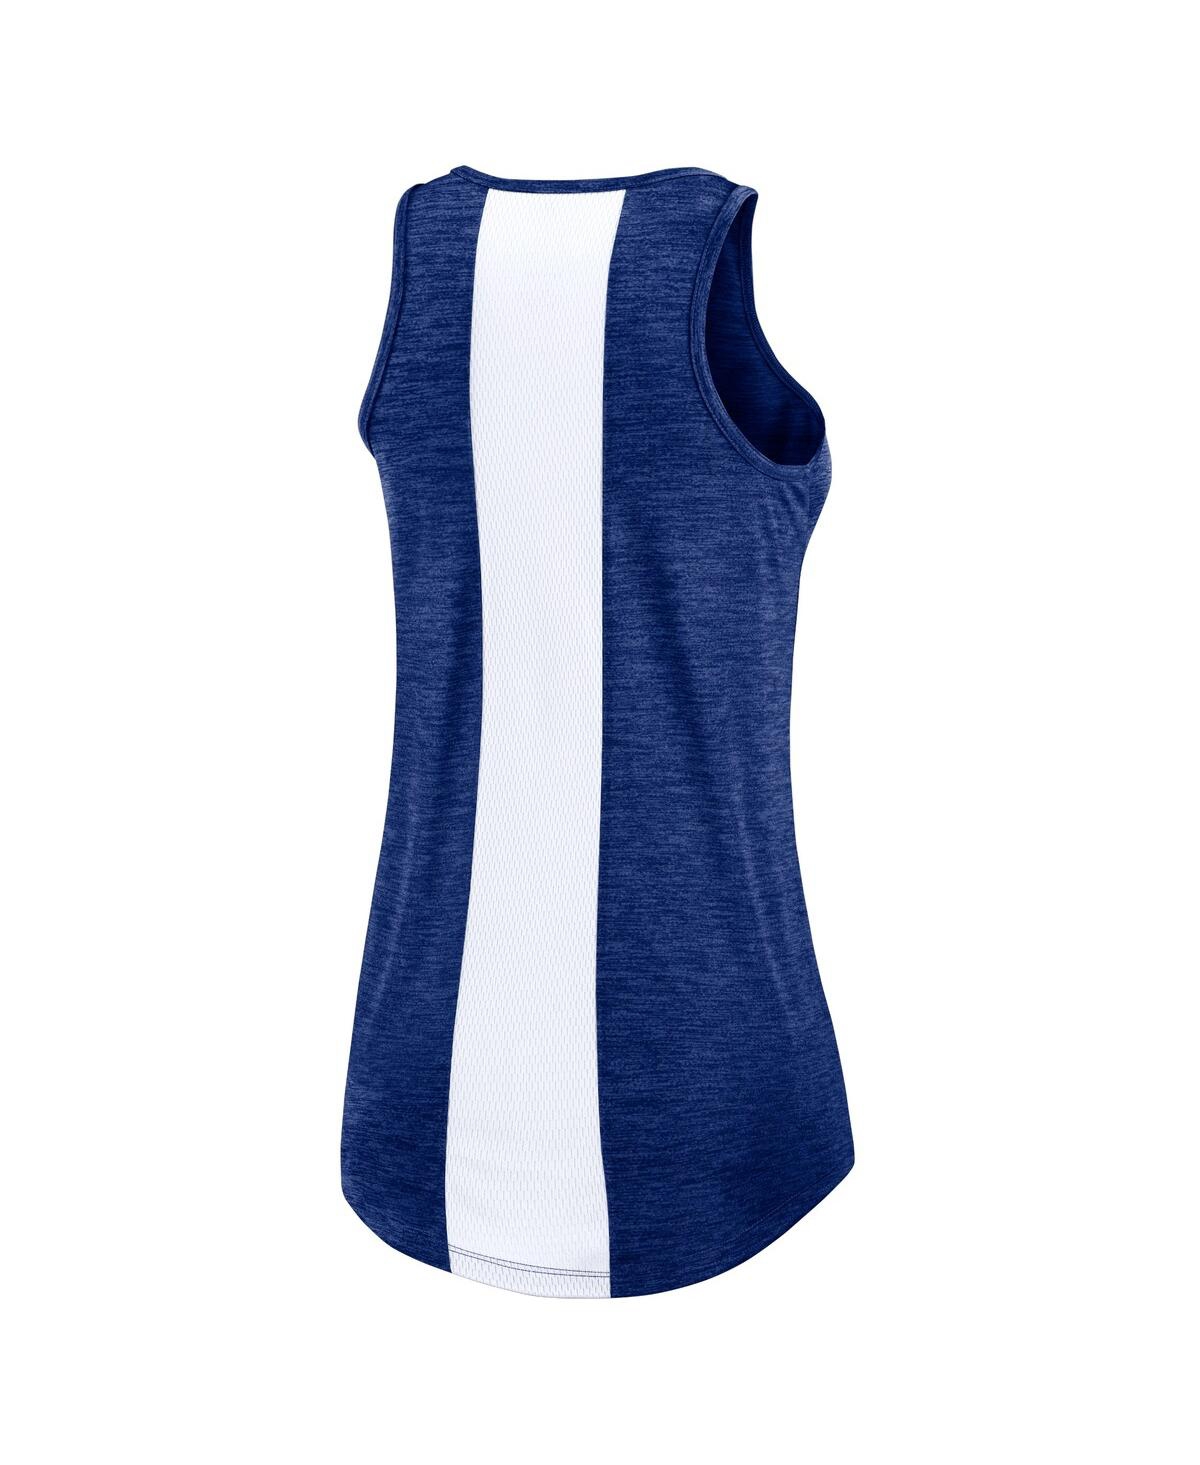 Shop Nike Women's  Royal Los Angeles Dodgers Right Mix High Neck Tank Top